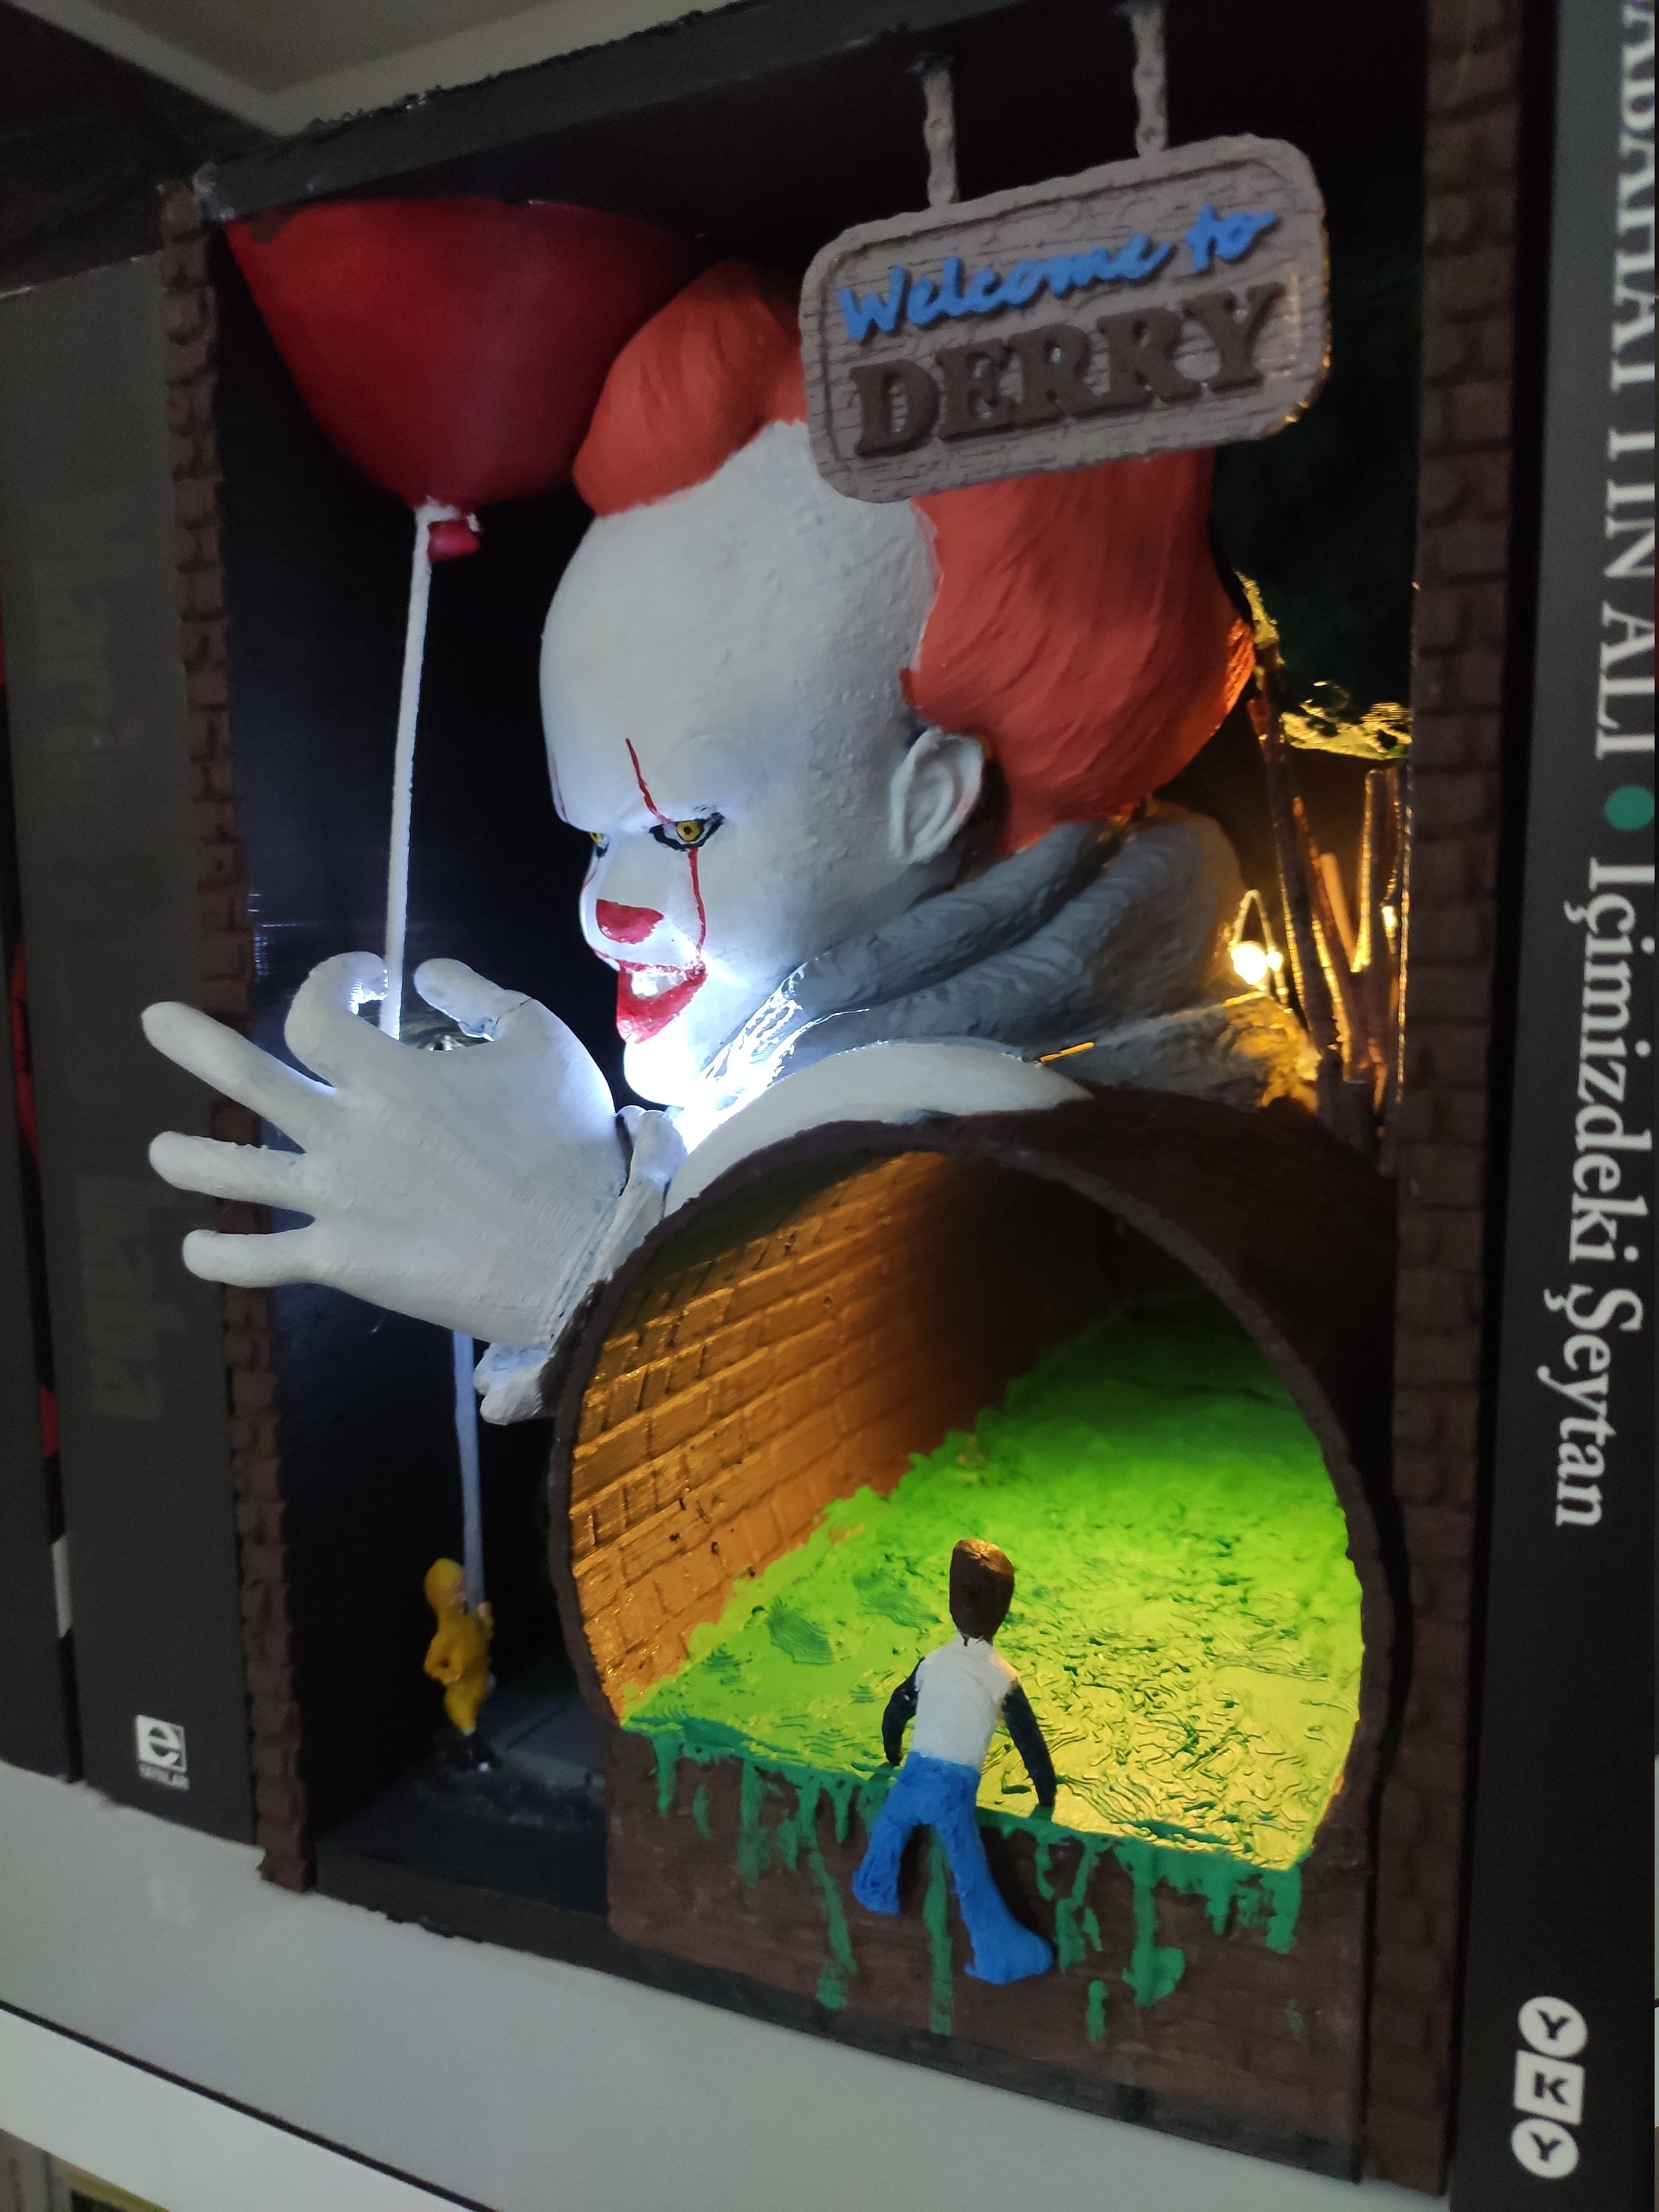 Book nook IT, Pennywise ça!